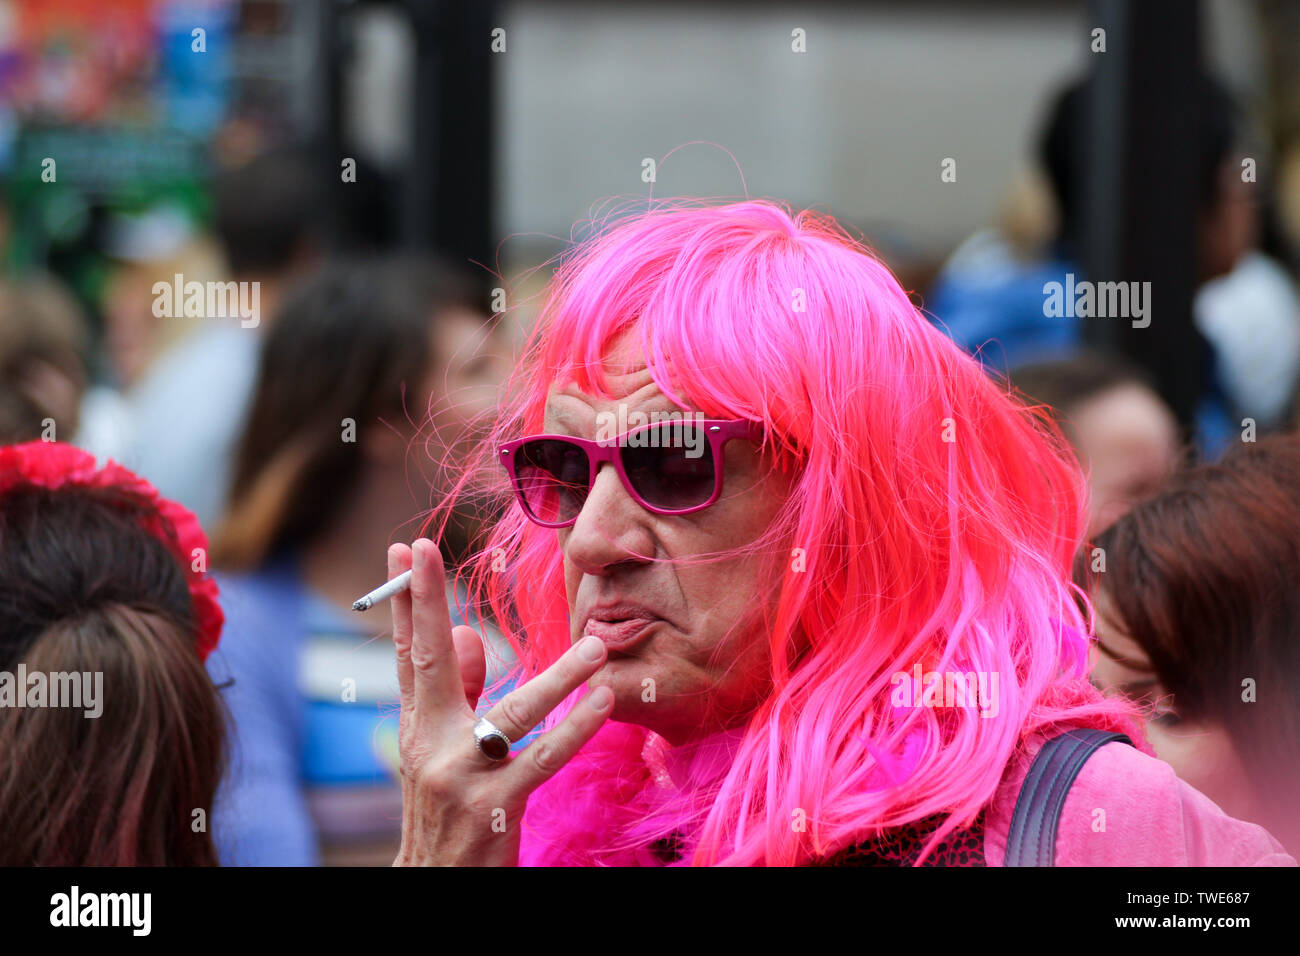 Middle-aged man in pink wig and sunglasses in Pride in London Parade 2014 in London, England Stock Photo